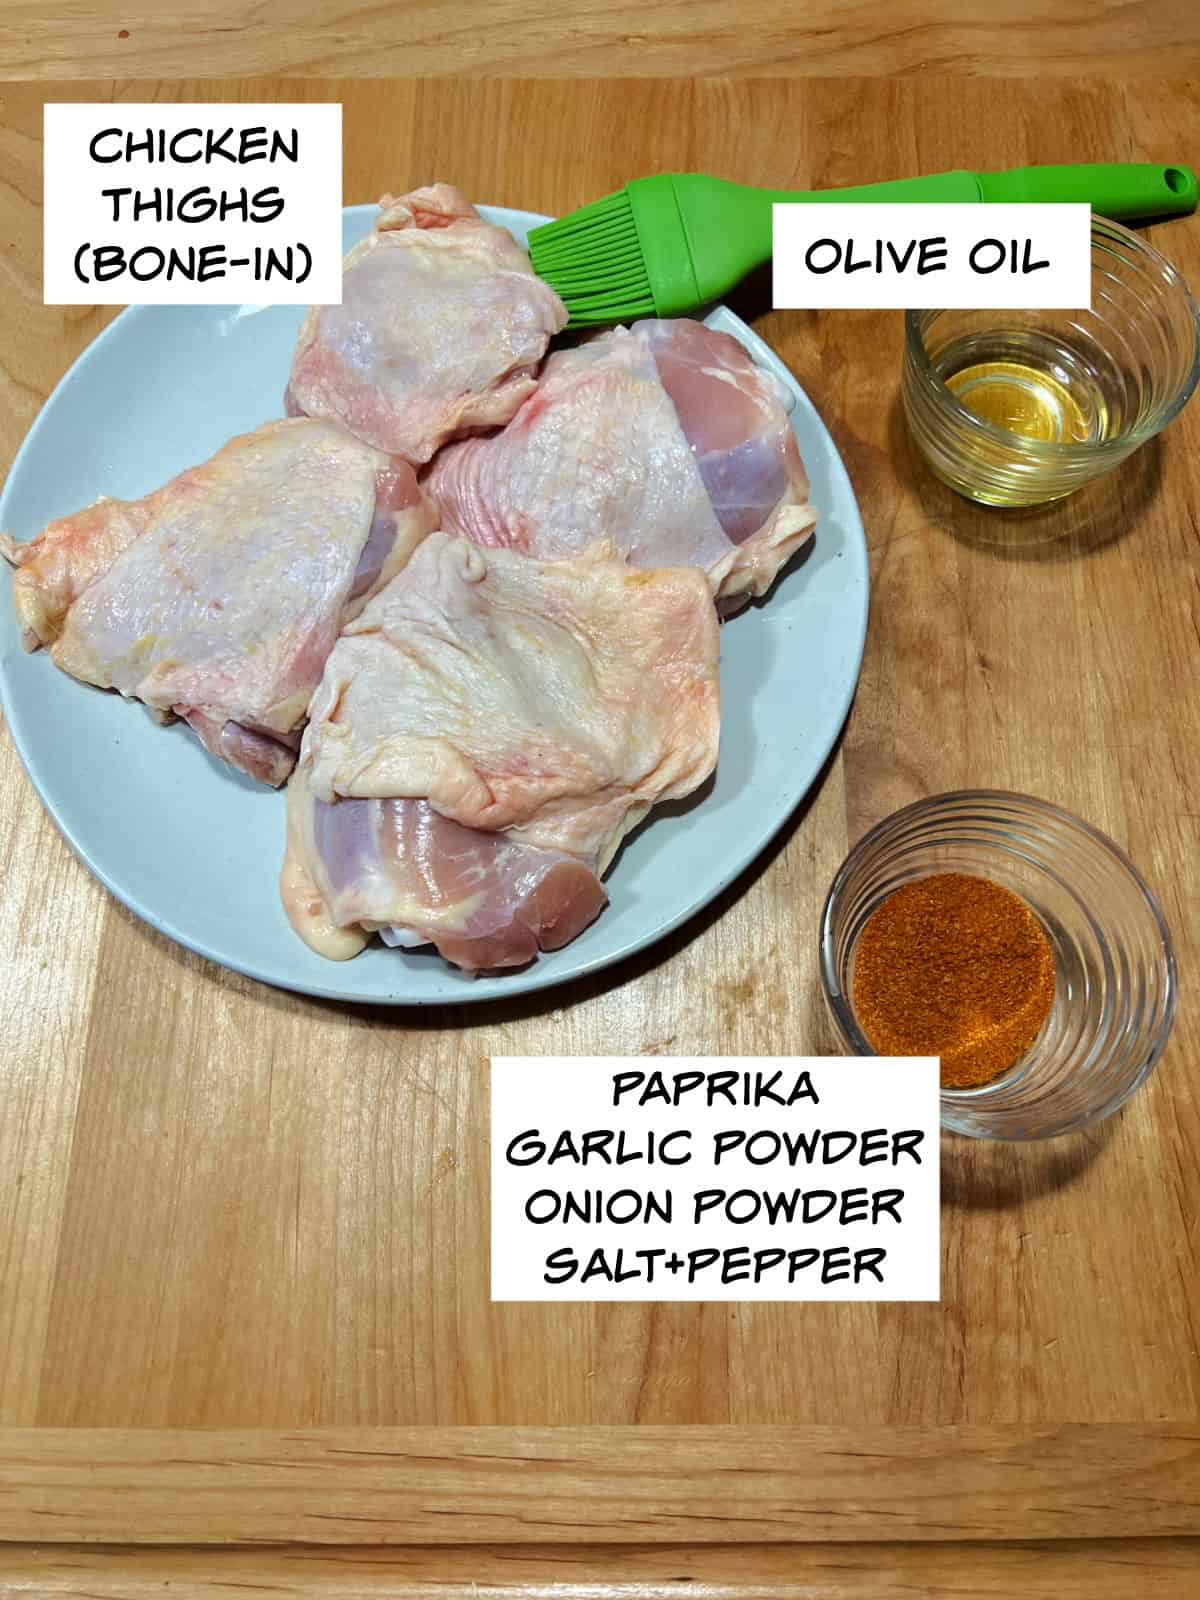 Ingredients: chicken thighs, olive oil, and spices.